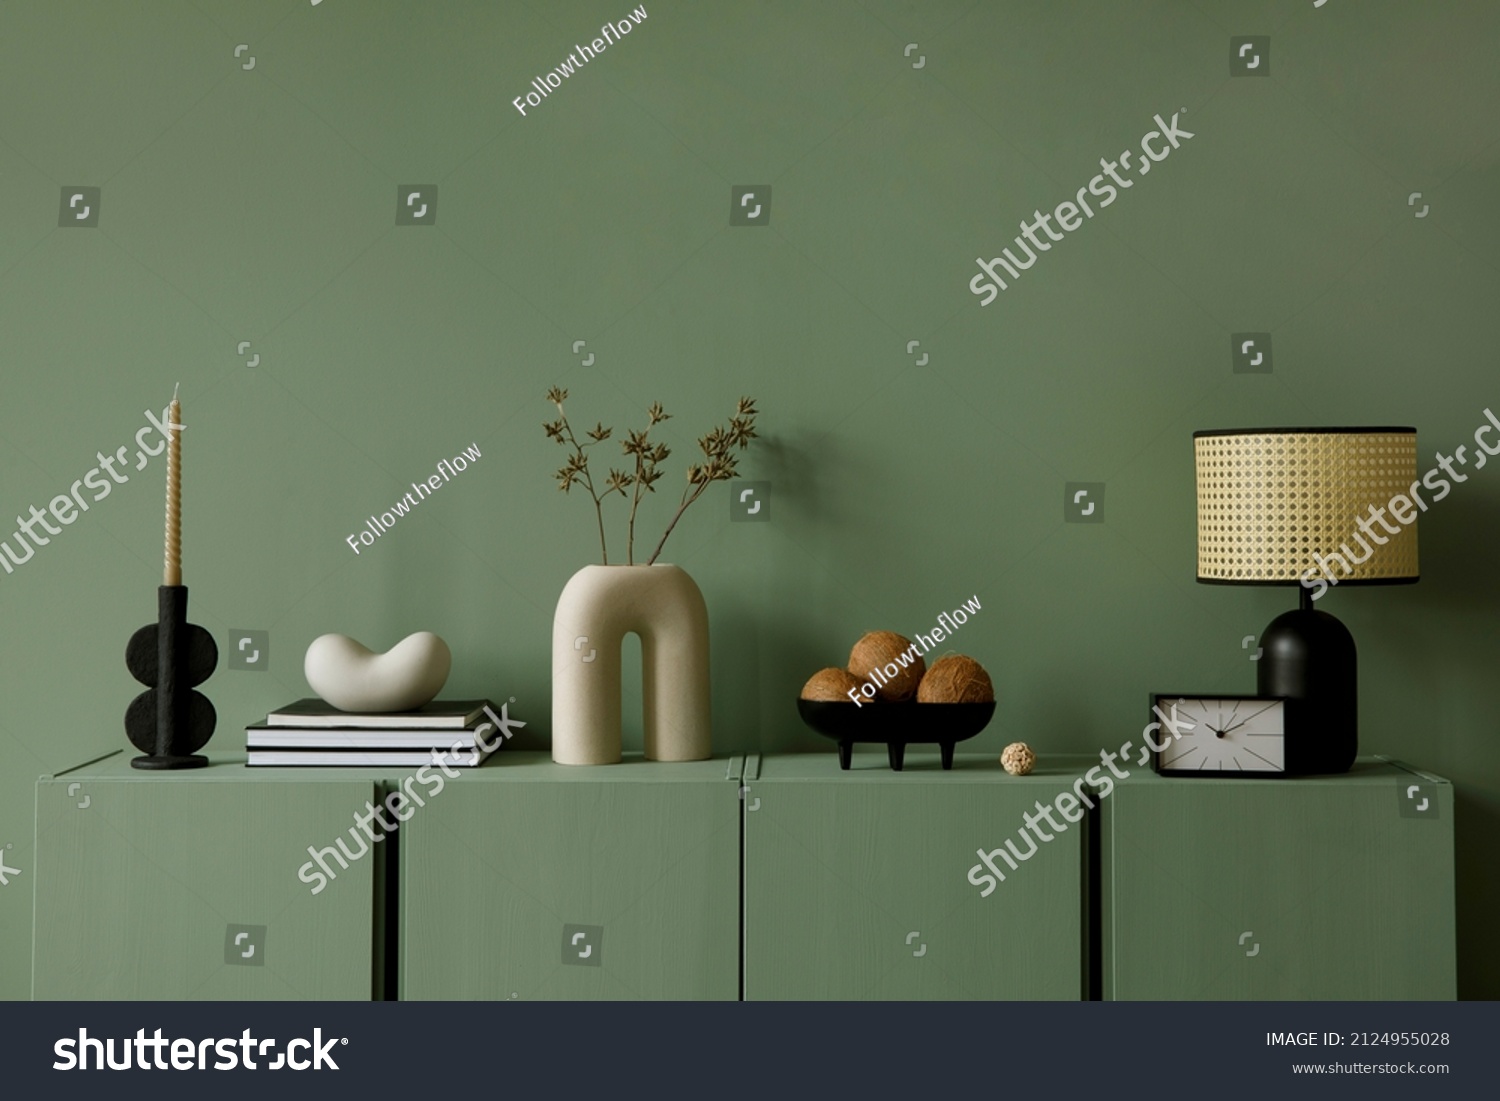 Modern living room interior composition with modern home decorations and personal accessories on the eucalyptus wooden commode. Eucalyptus wall. Template. Copy space. #2124955028